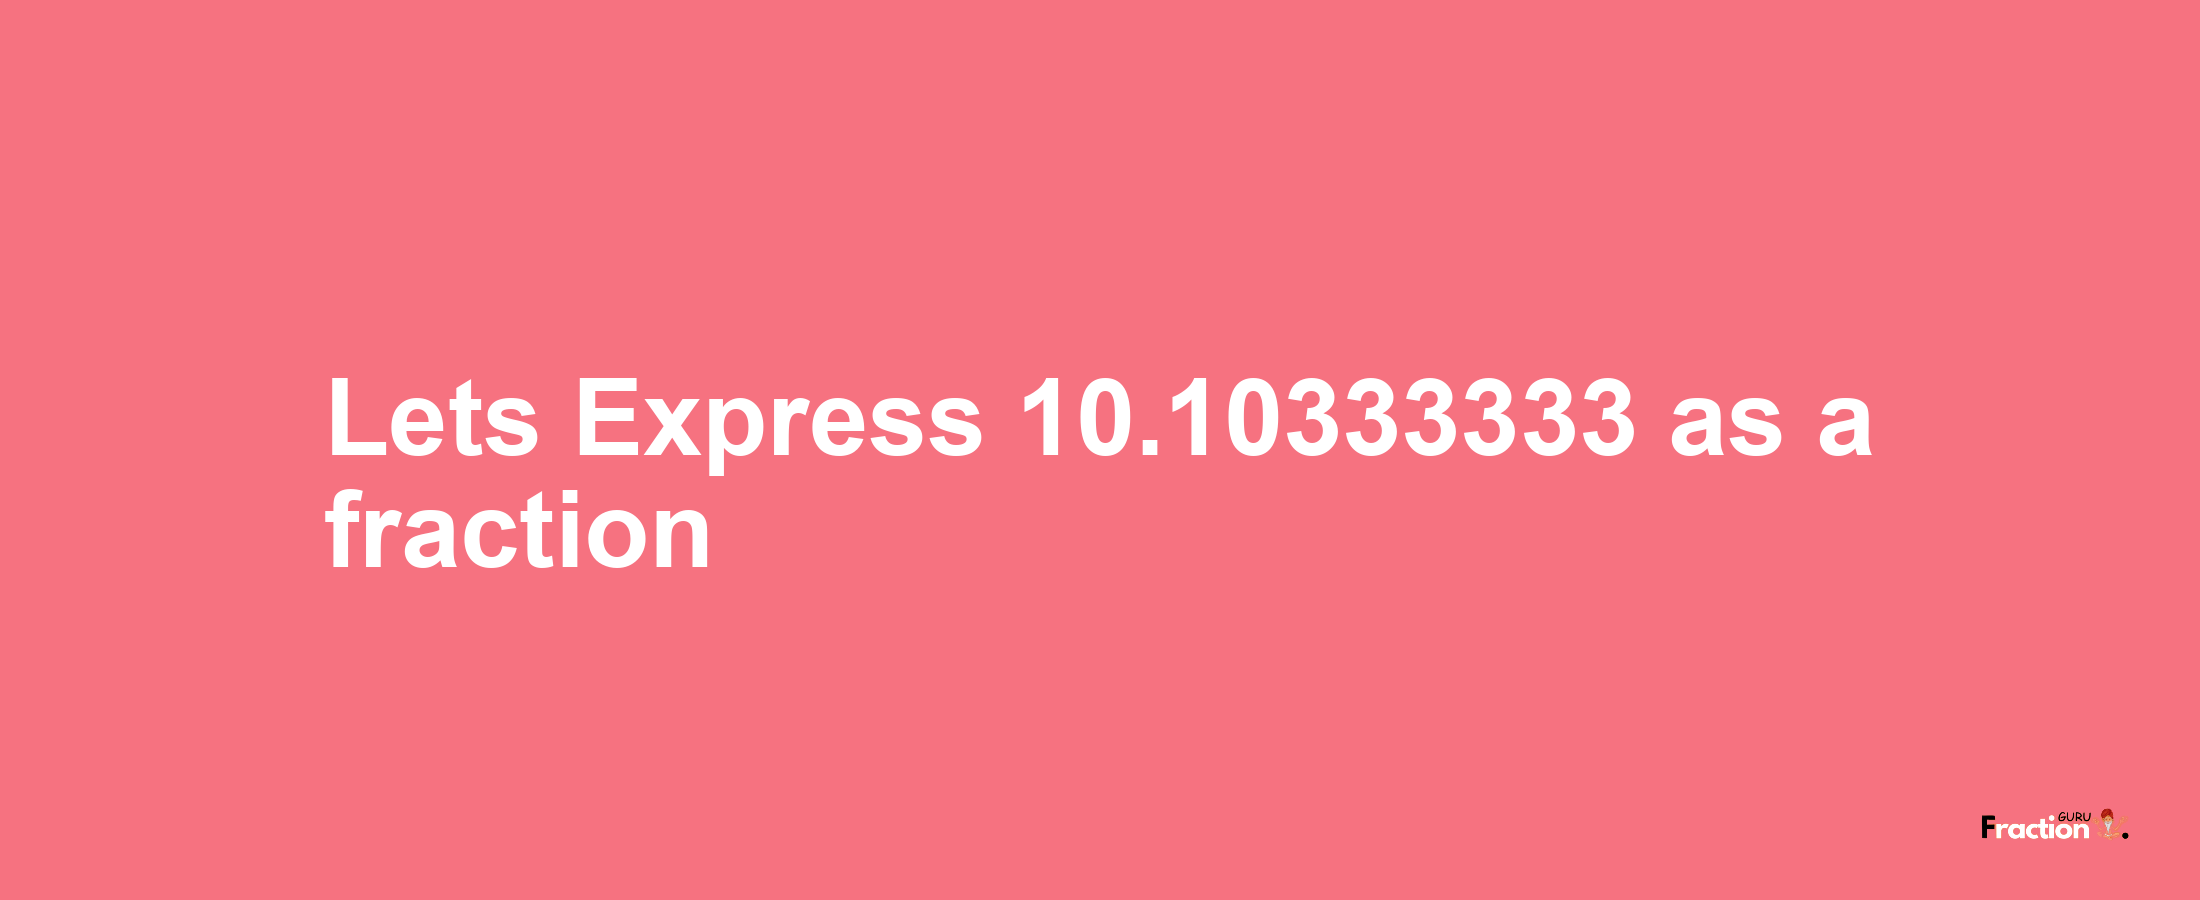 Lets Express 10.10333333 as afraction